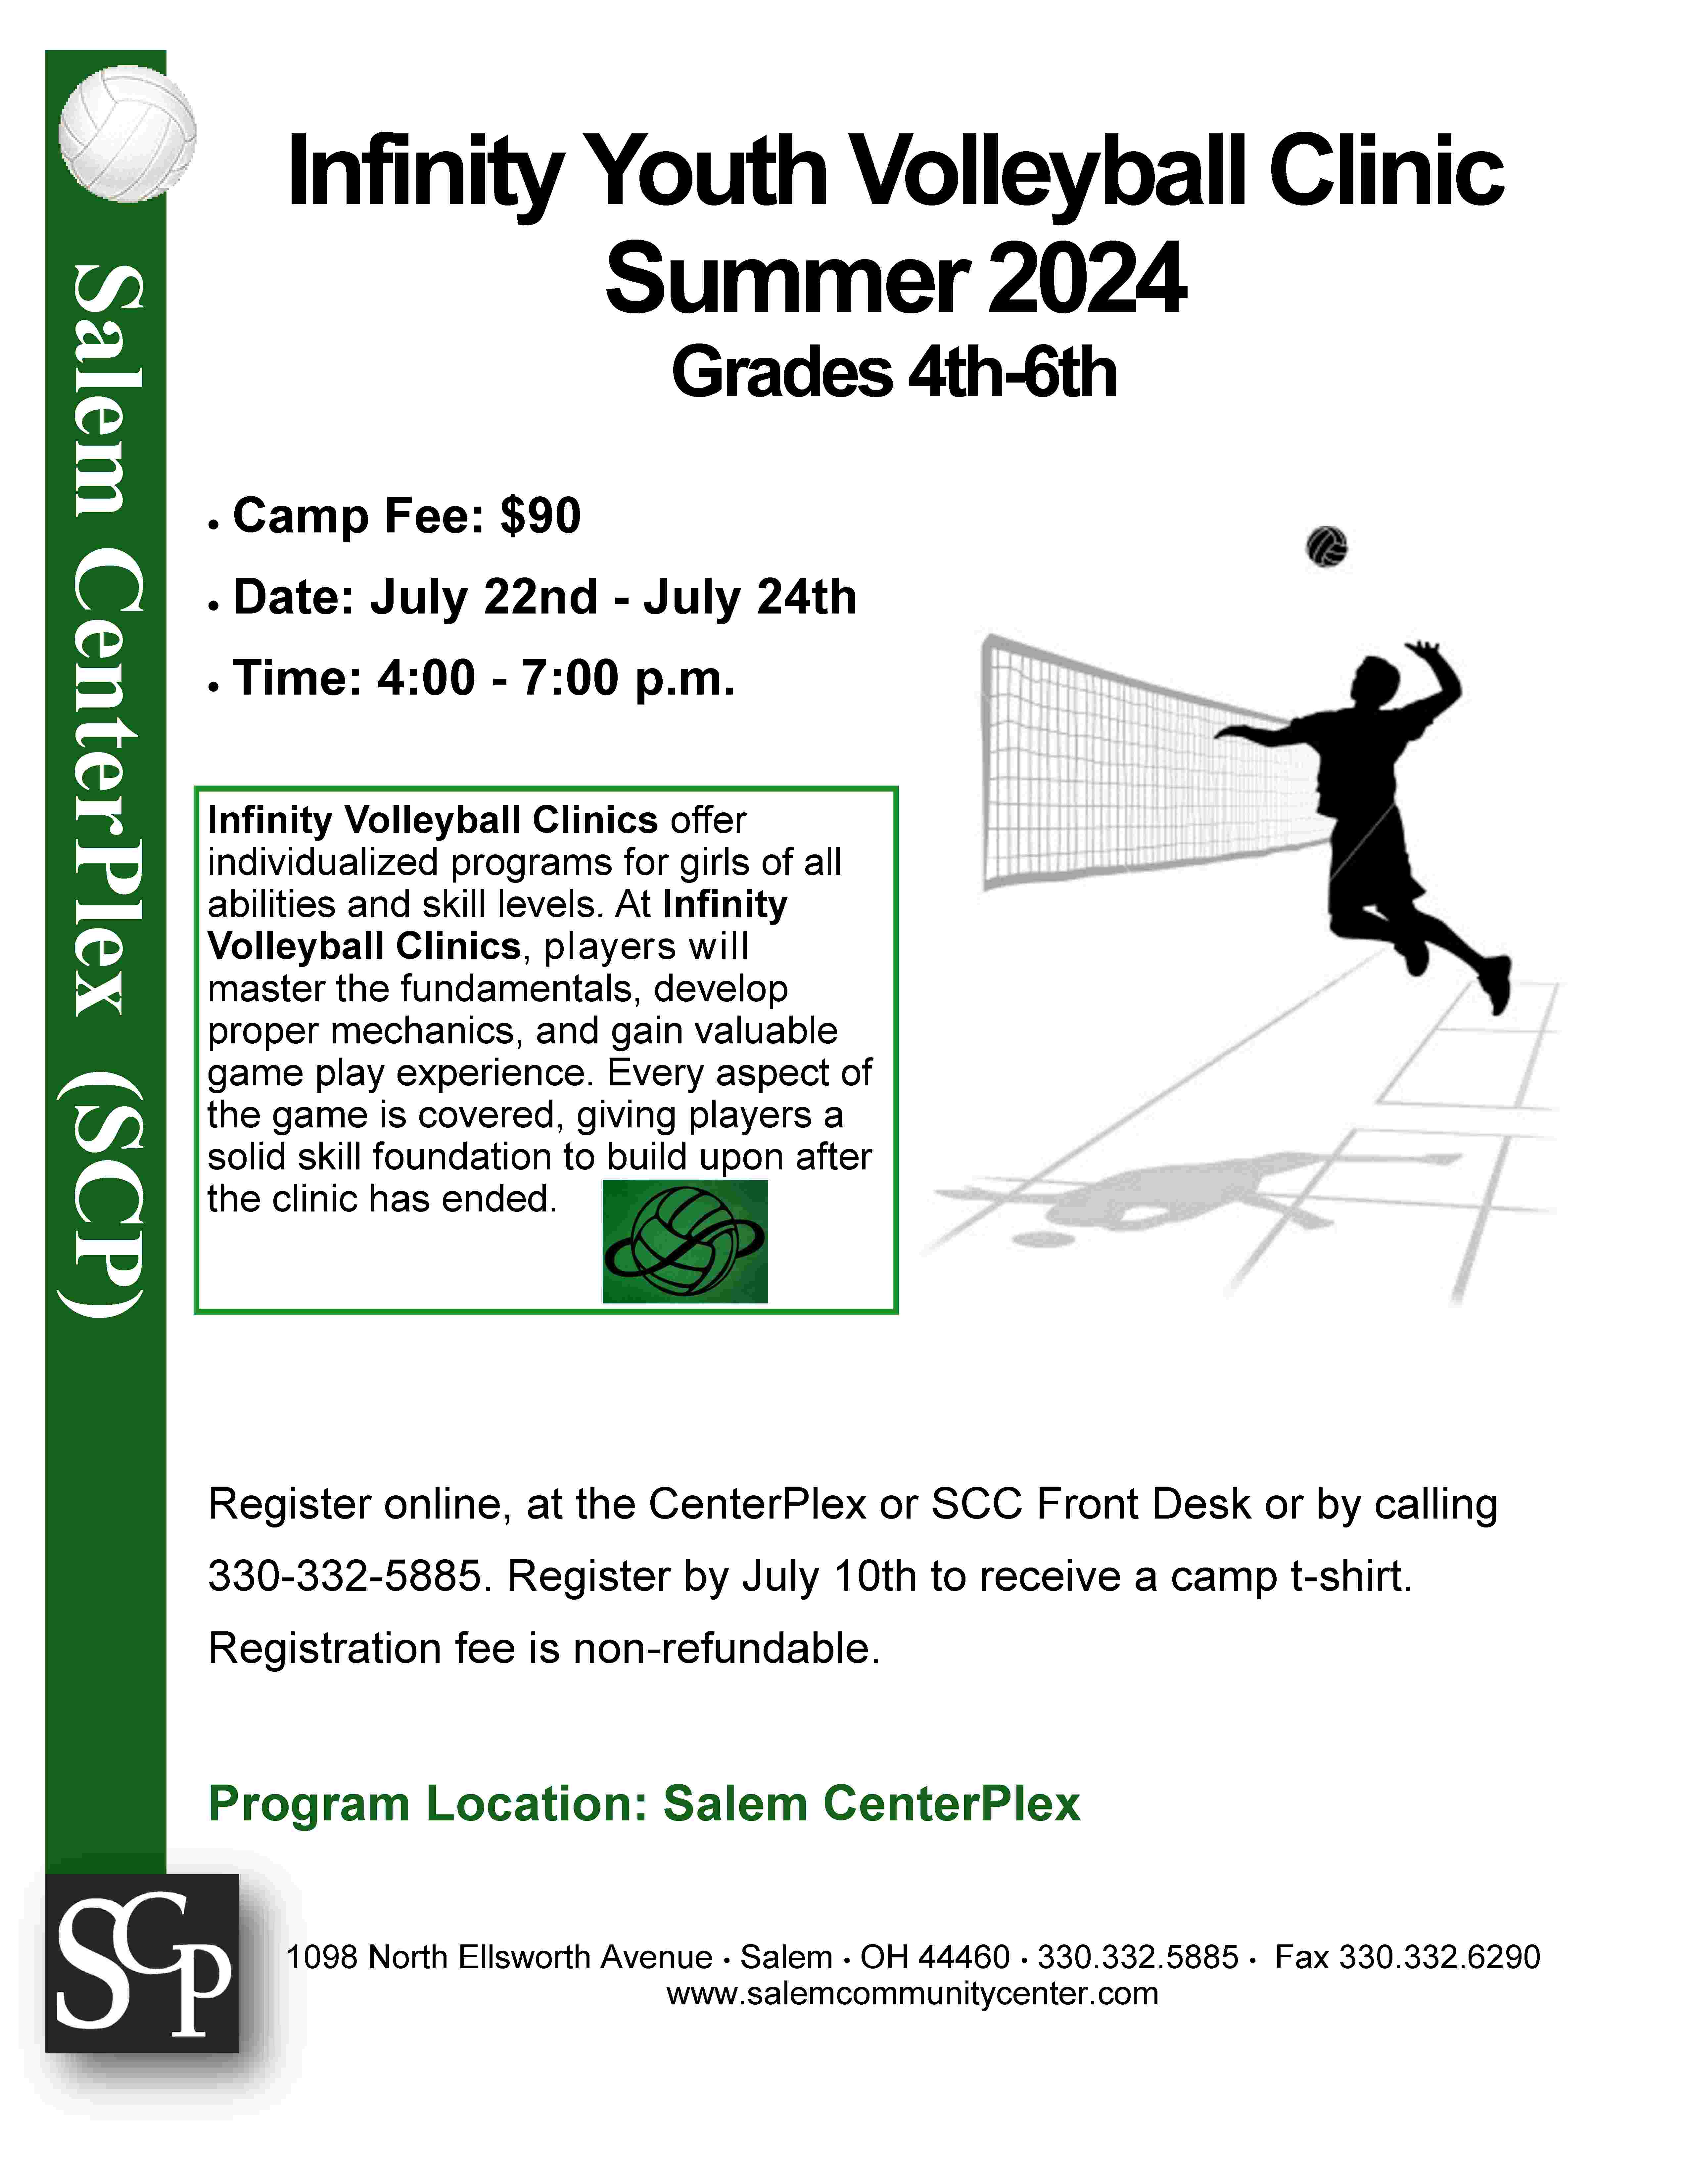 Infinity Youth Volleyball Clinic 2024 4 6 001